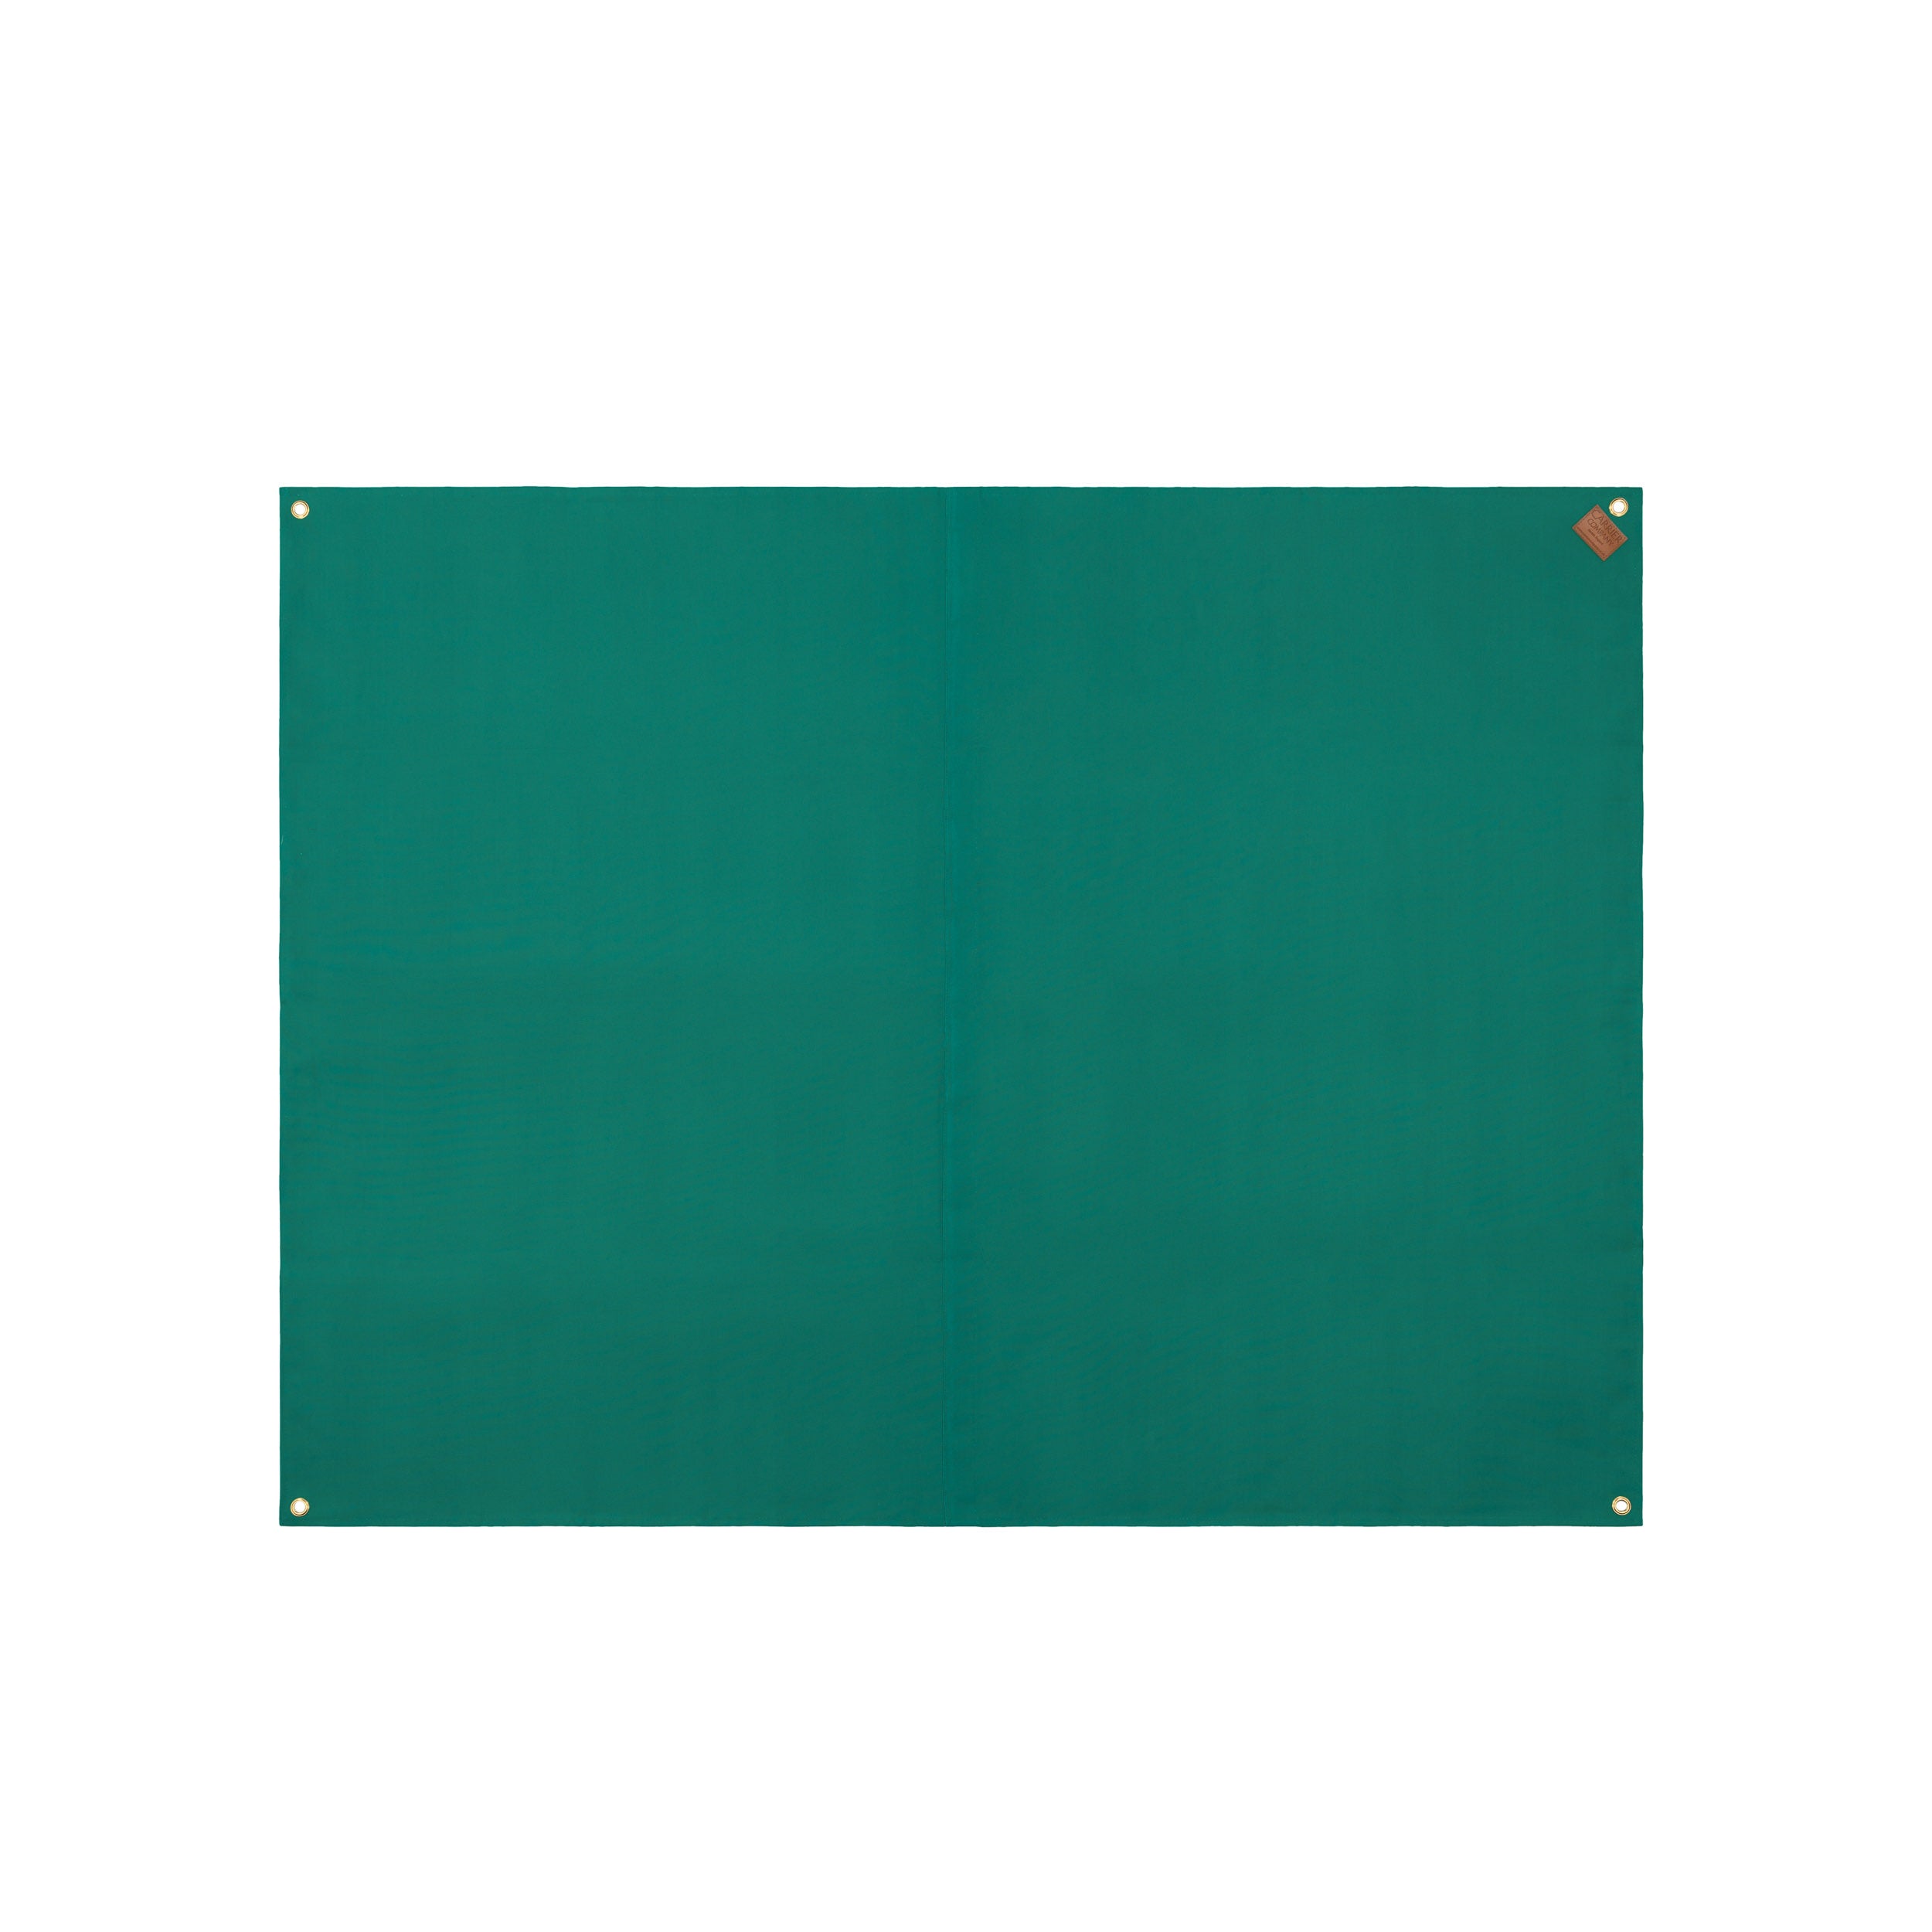 Carrier Company Ground Sheet in Jade